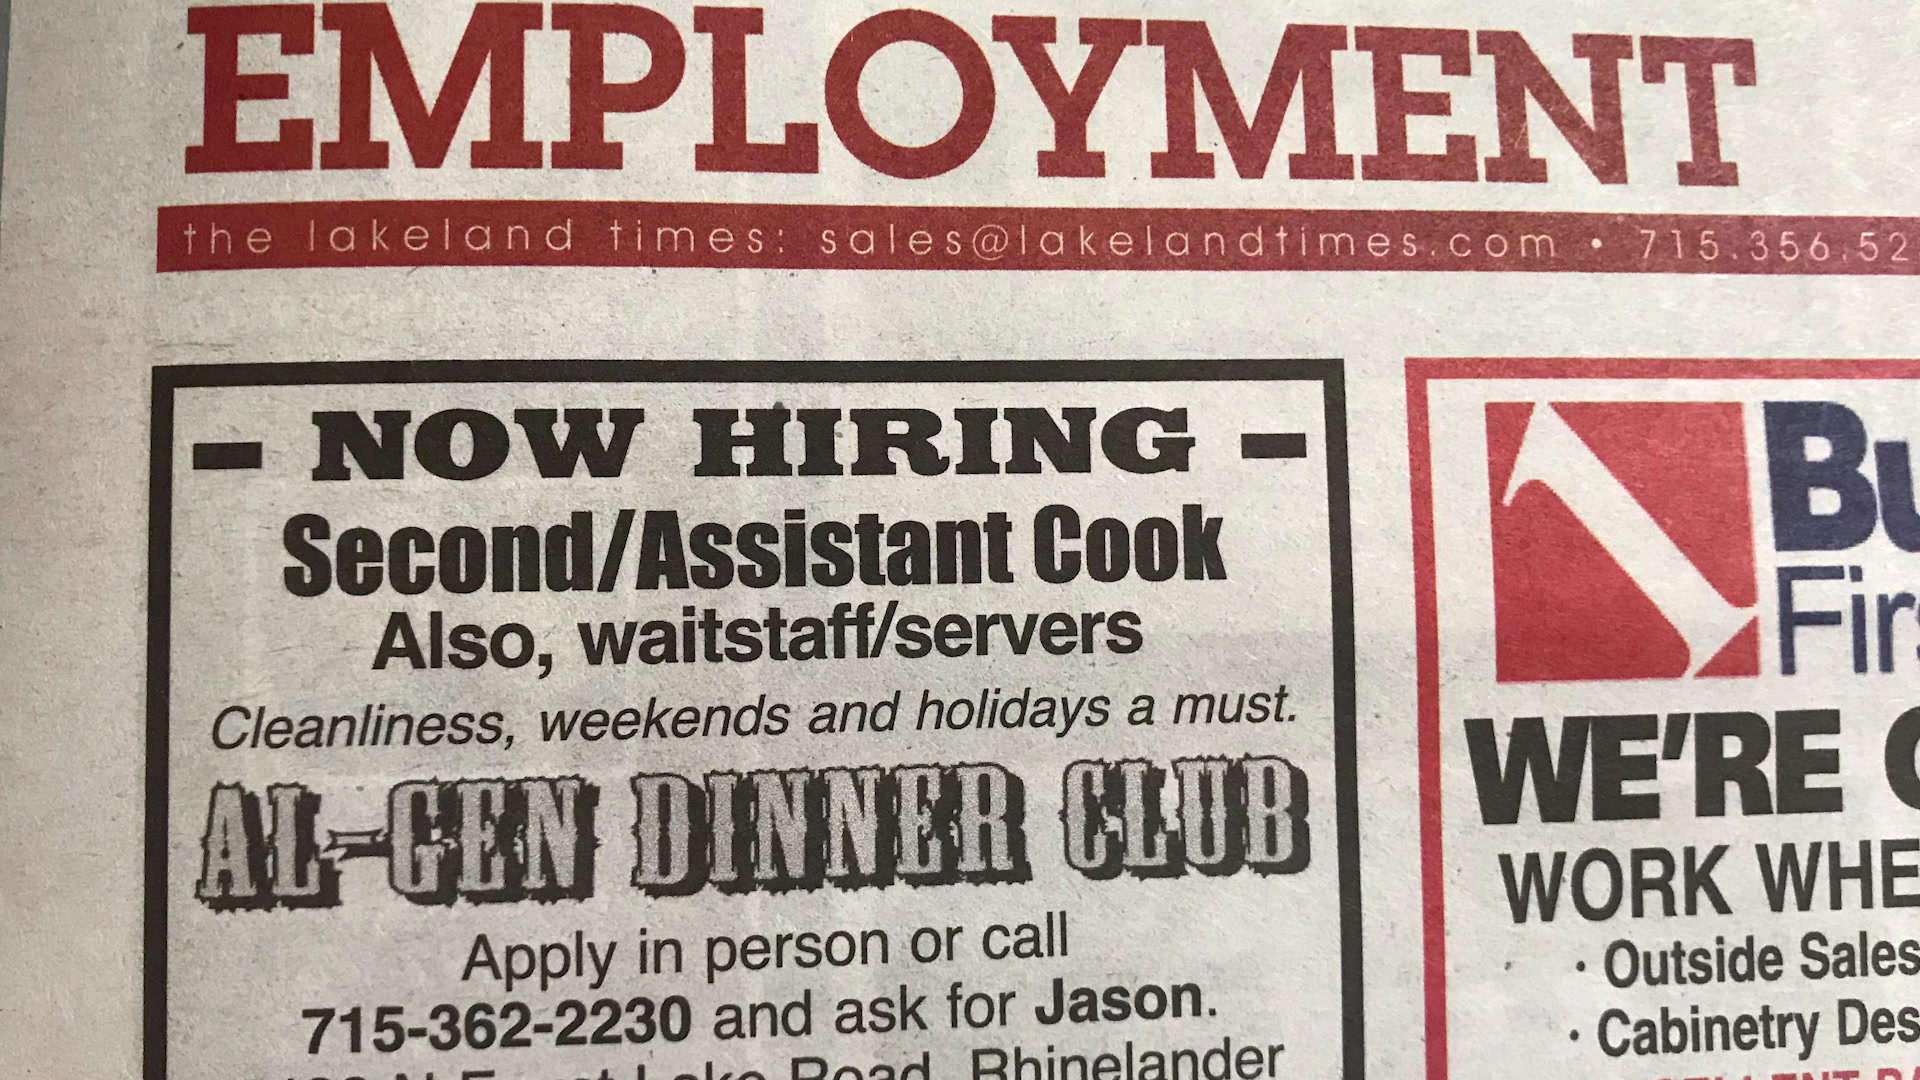 A newspaper job ad for Al-Gen Dinner Club reads "Now Hiring: Second/Assistant Cook also, waitstaff/servers: Cleanliness, weekends and holidays a must."